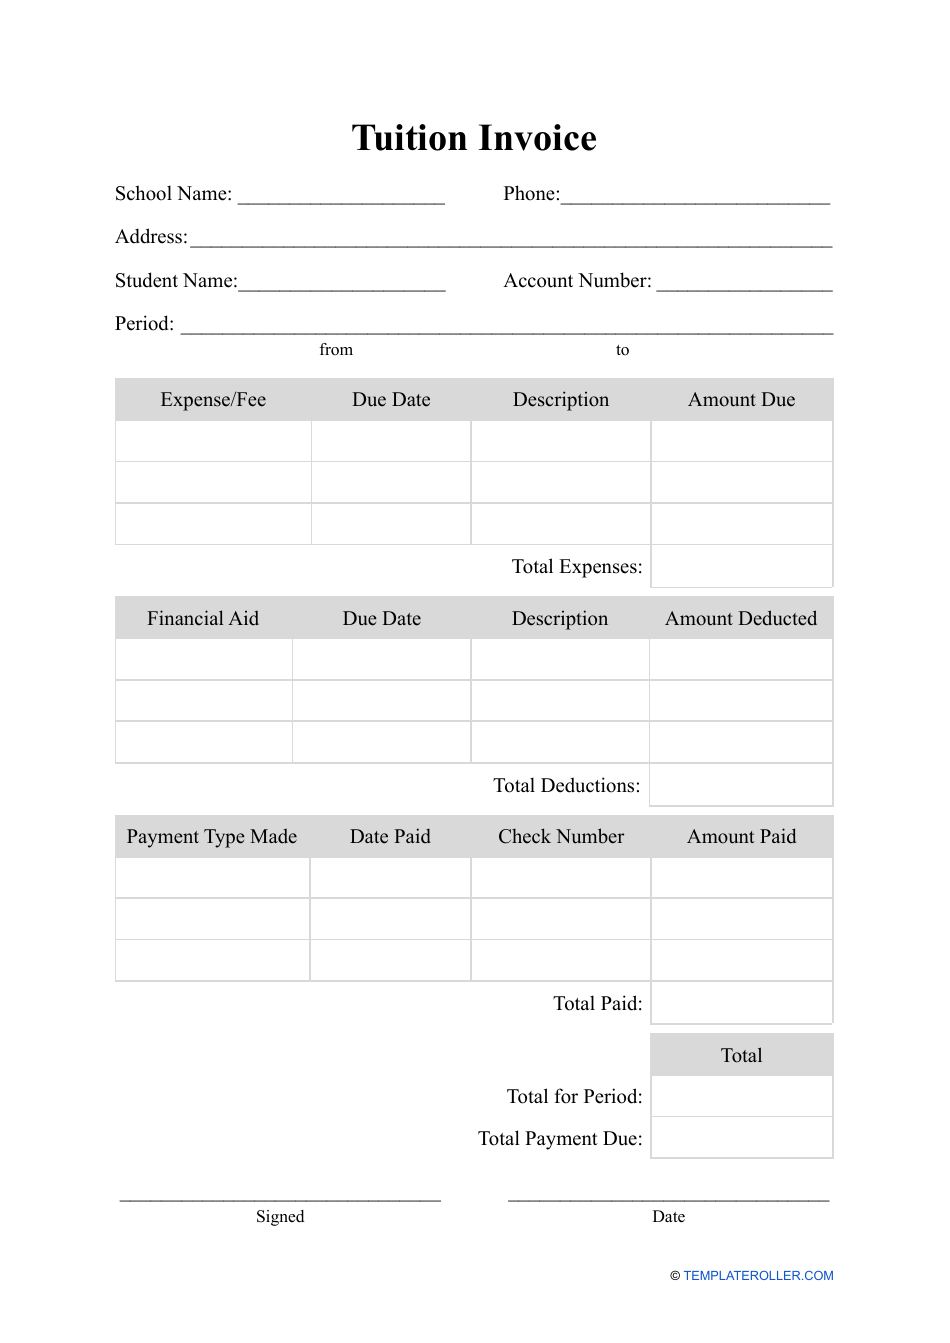 tuition-invoice-template-fill-out-sign-online-and-download-pdf-templateroller